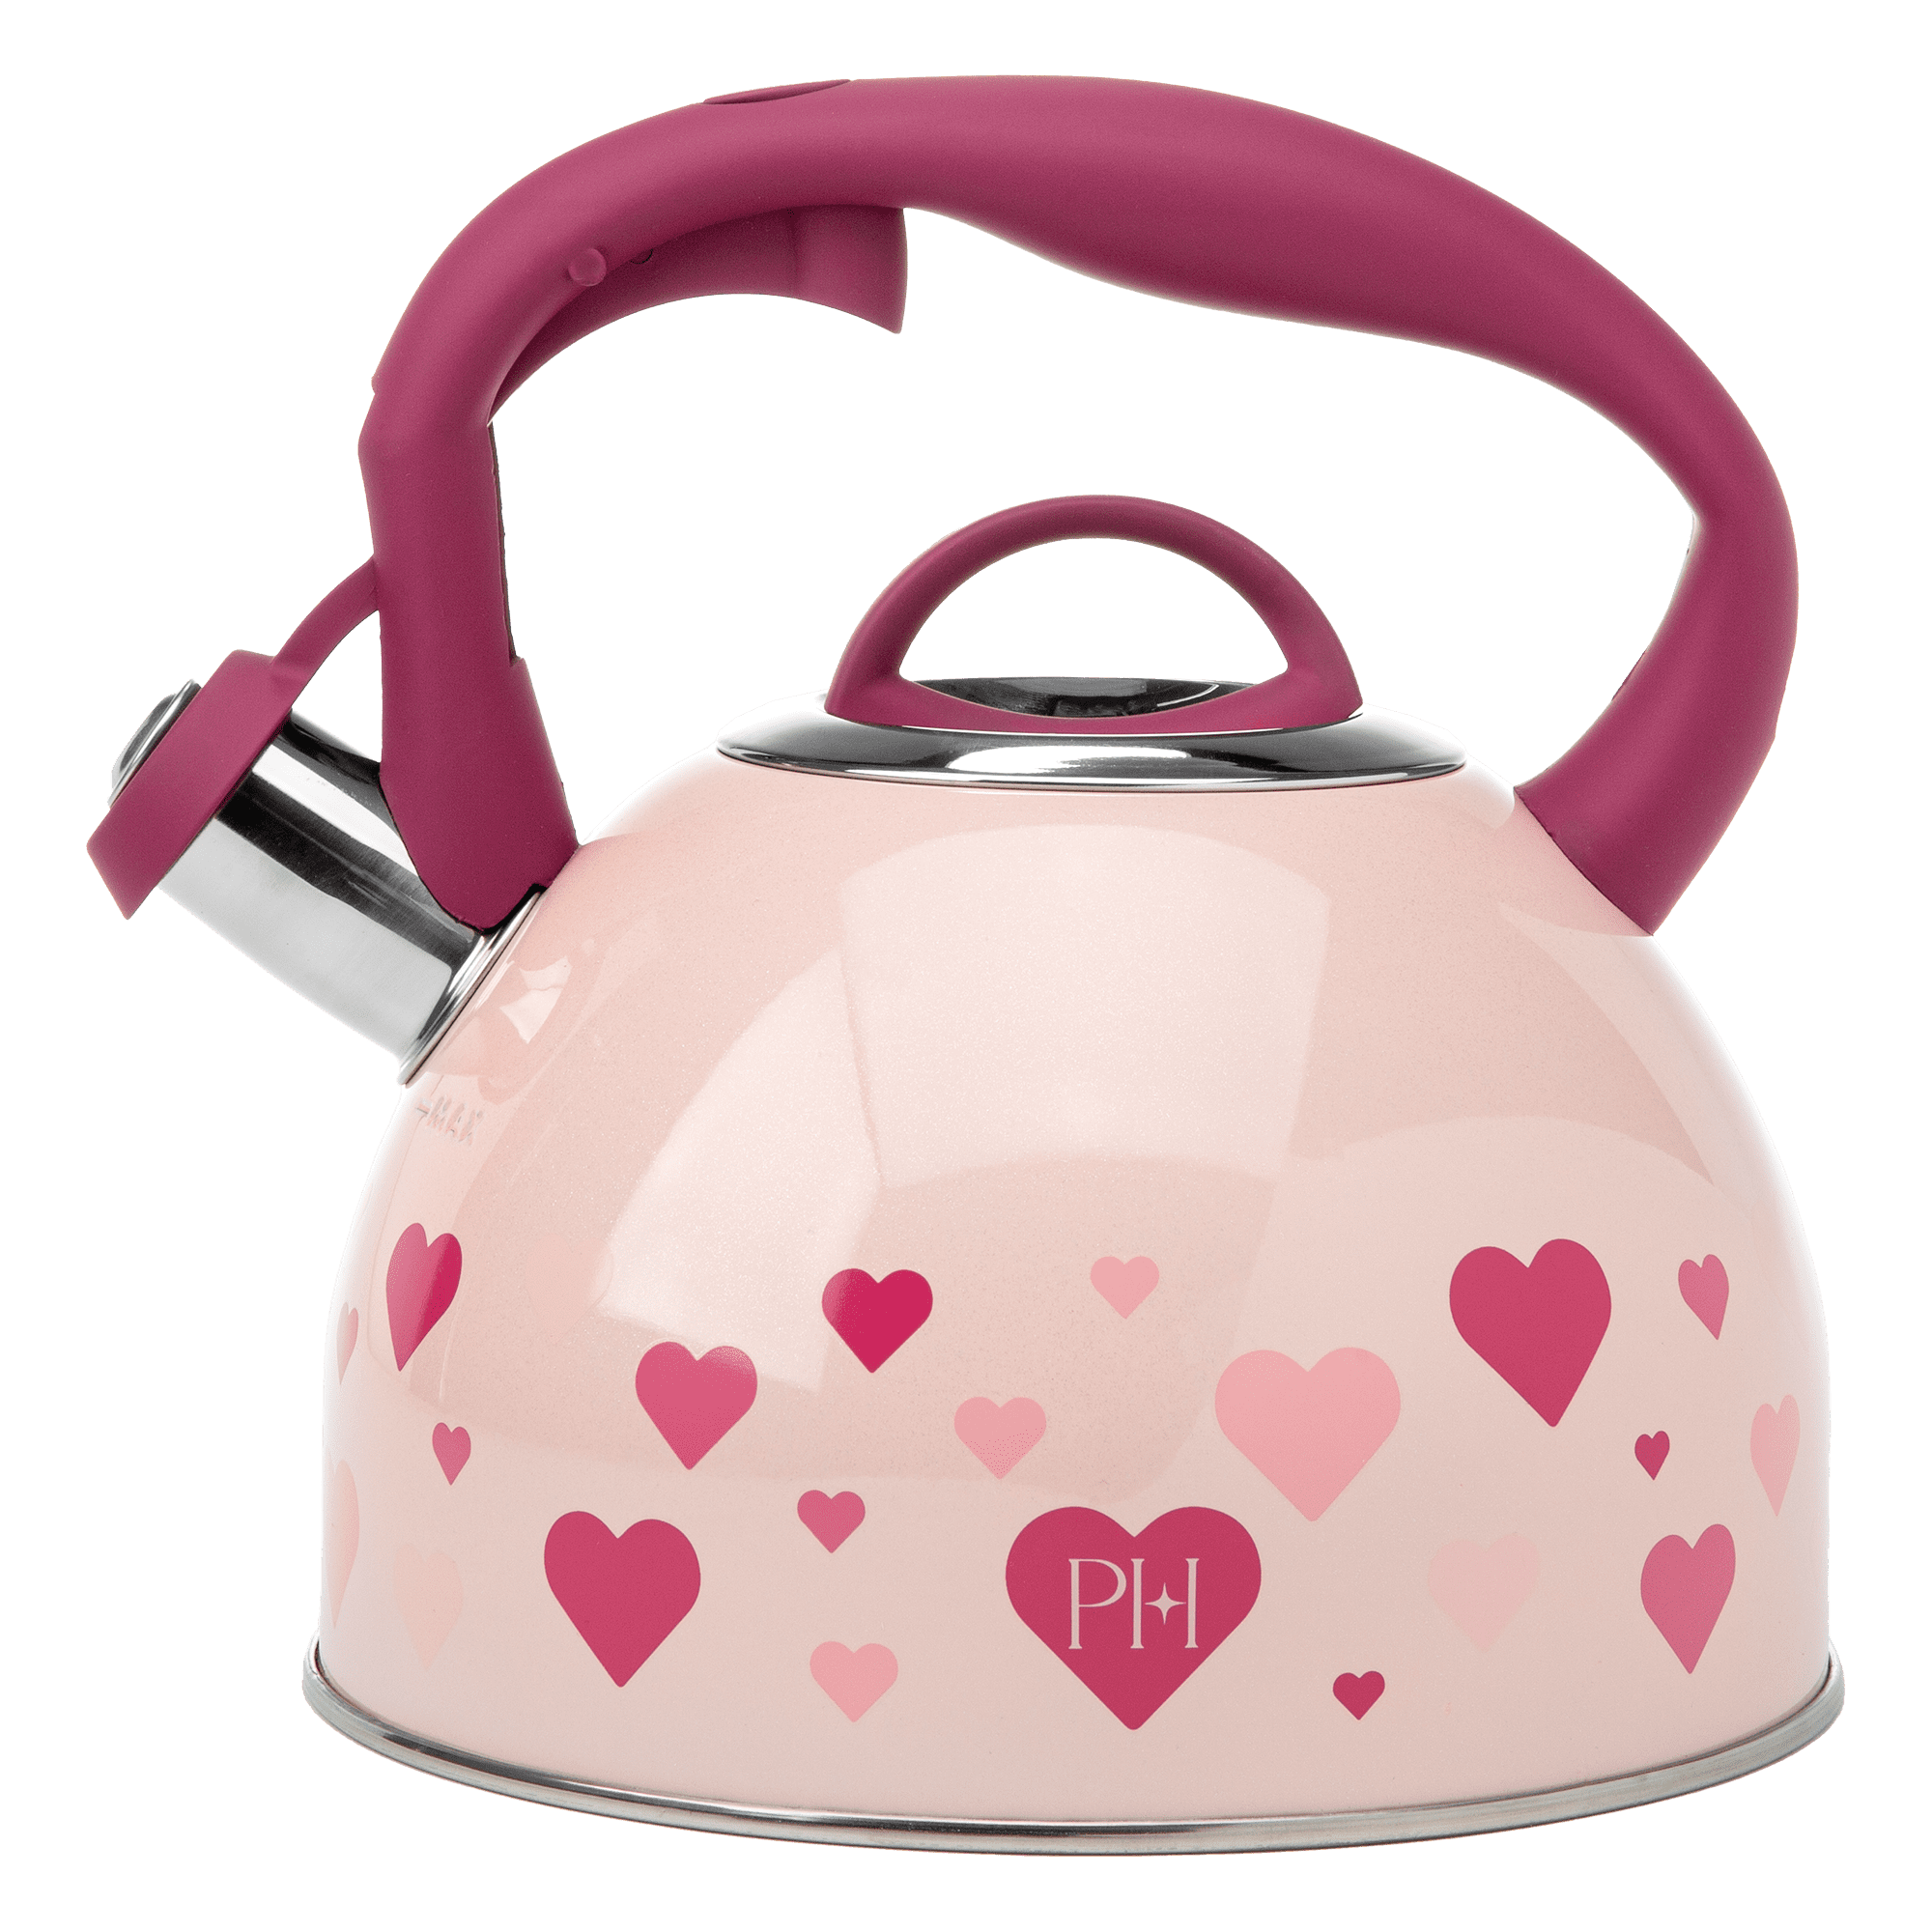  Customer reviews: Paris Hilton Whistling Stovetop Tea Kettle,  Stainless Steel with Color Changing "That's Hot" Heat Indicator  Design, Soft Touch Handle, 2.5-Quart, Pink